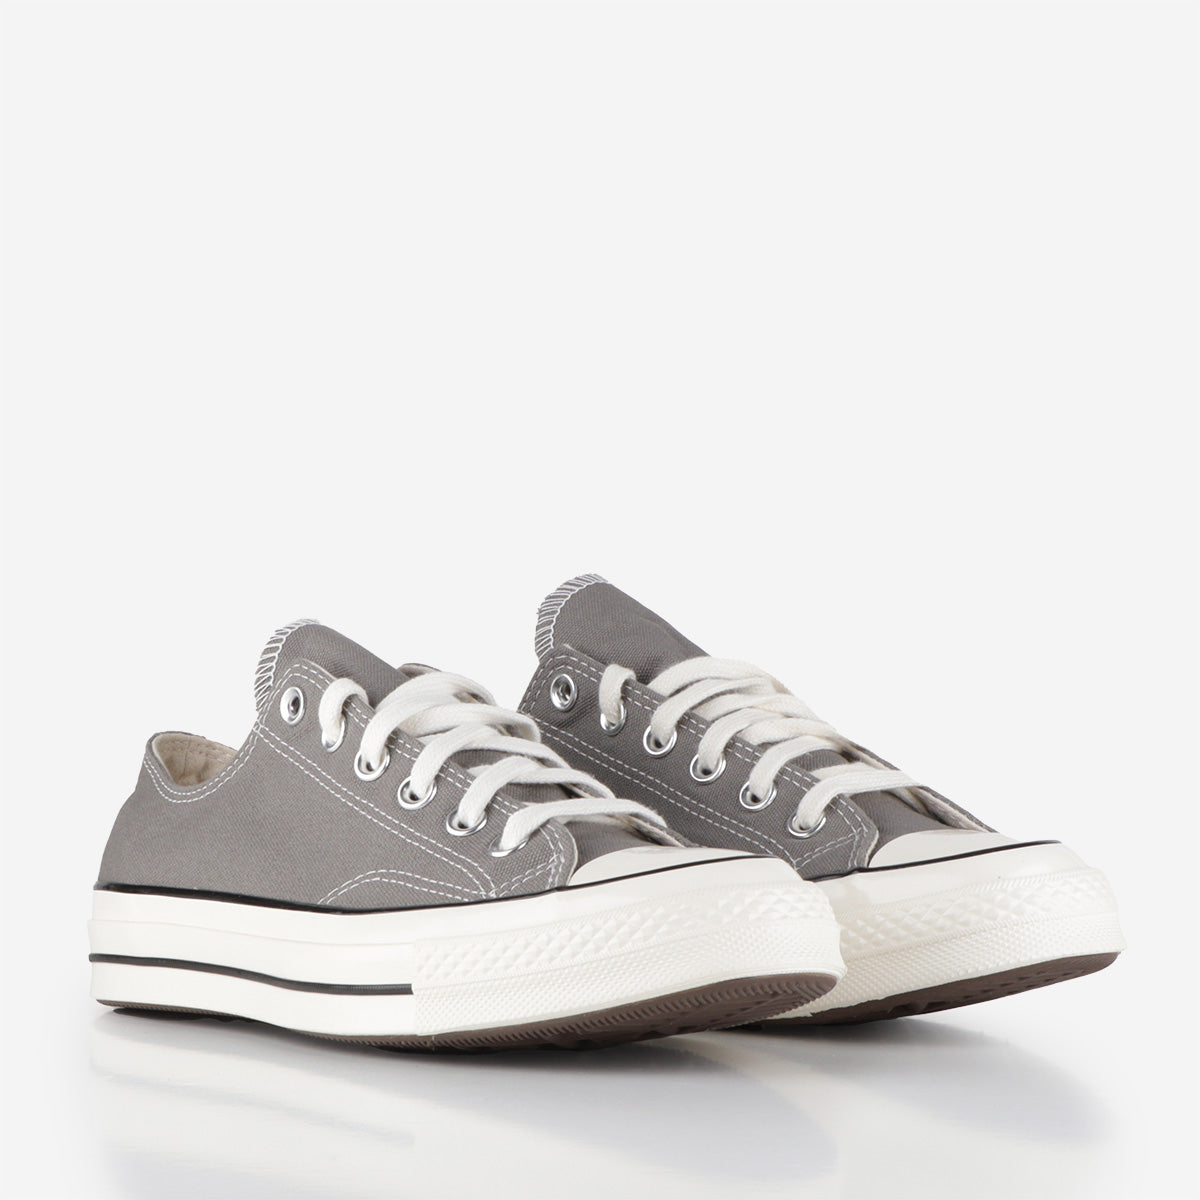 Converse Chuck Taylor All Star 70 Ox Shoes